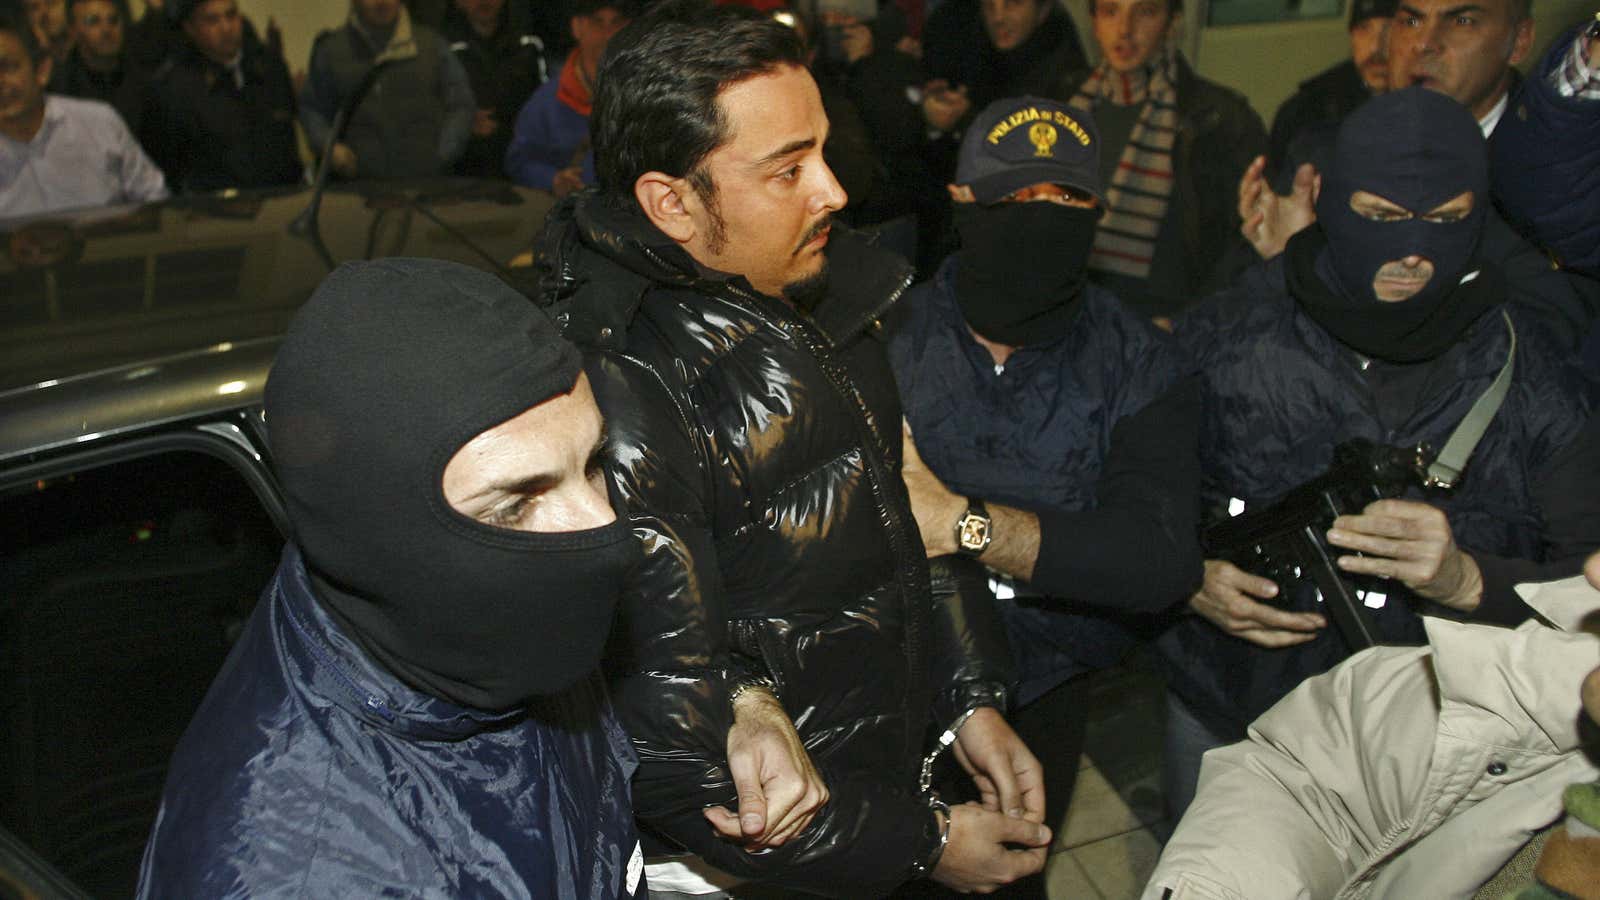 Italian police’s crackdown on Sicilian mafia may leave gaps for the emergence of Nigerian gangs.